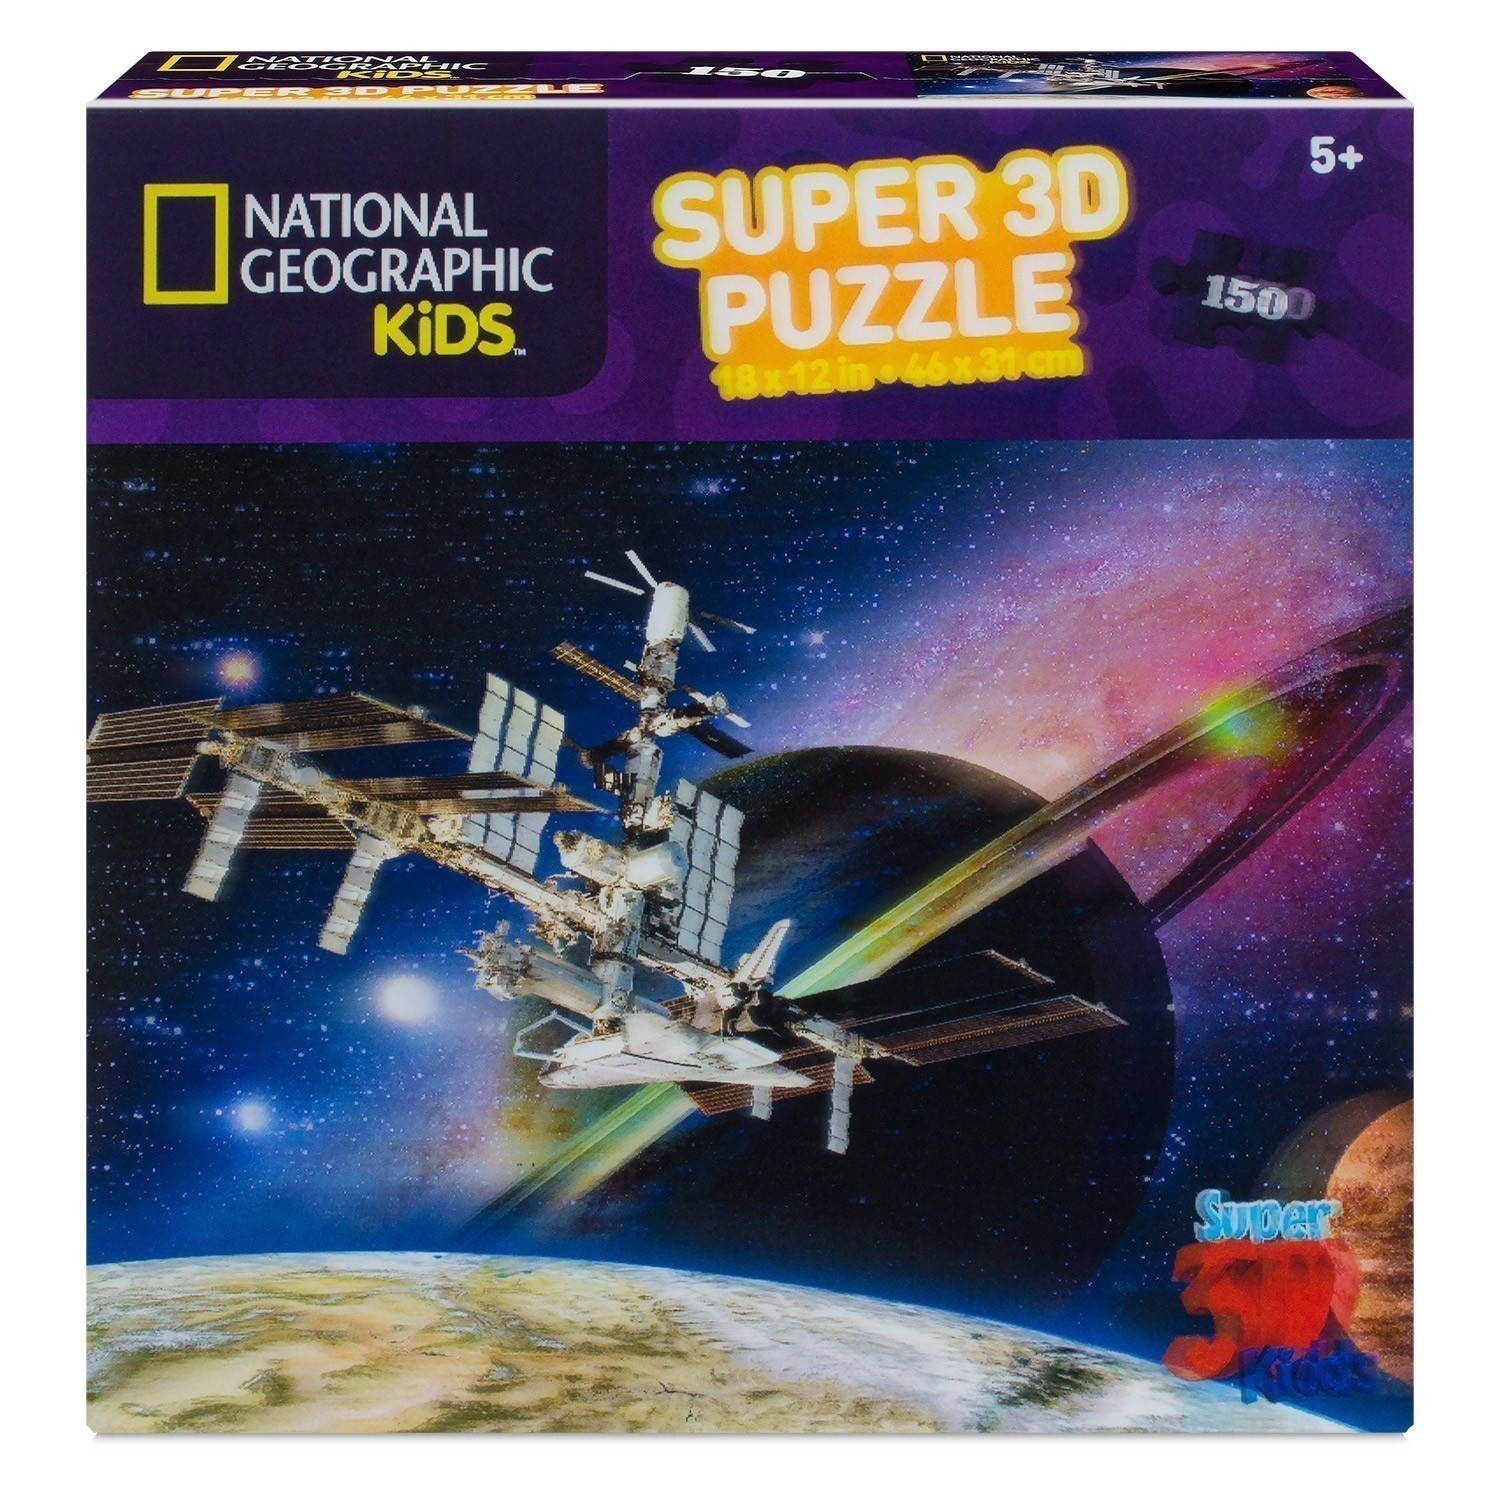 National Geographic Kids - Lenticular Super 3D Puzzle - Satellite In Space - 150 Pieces